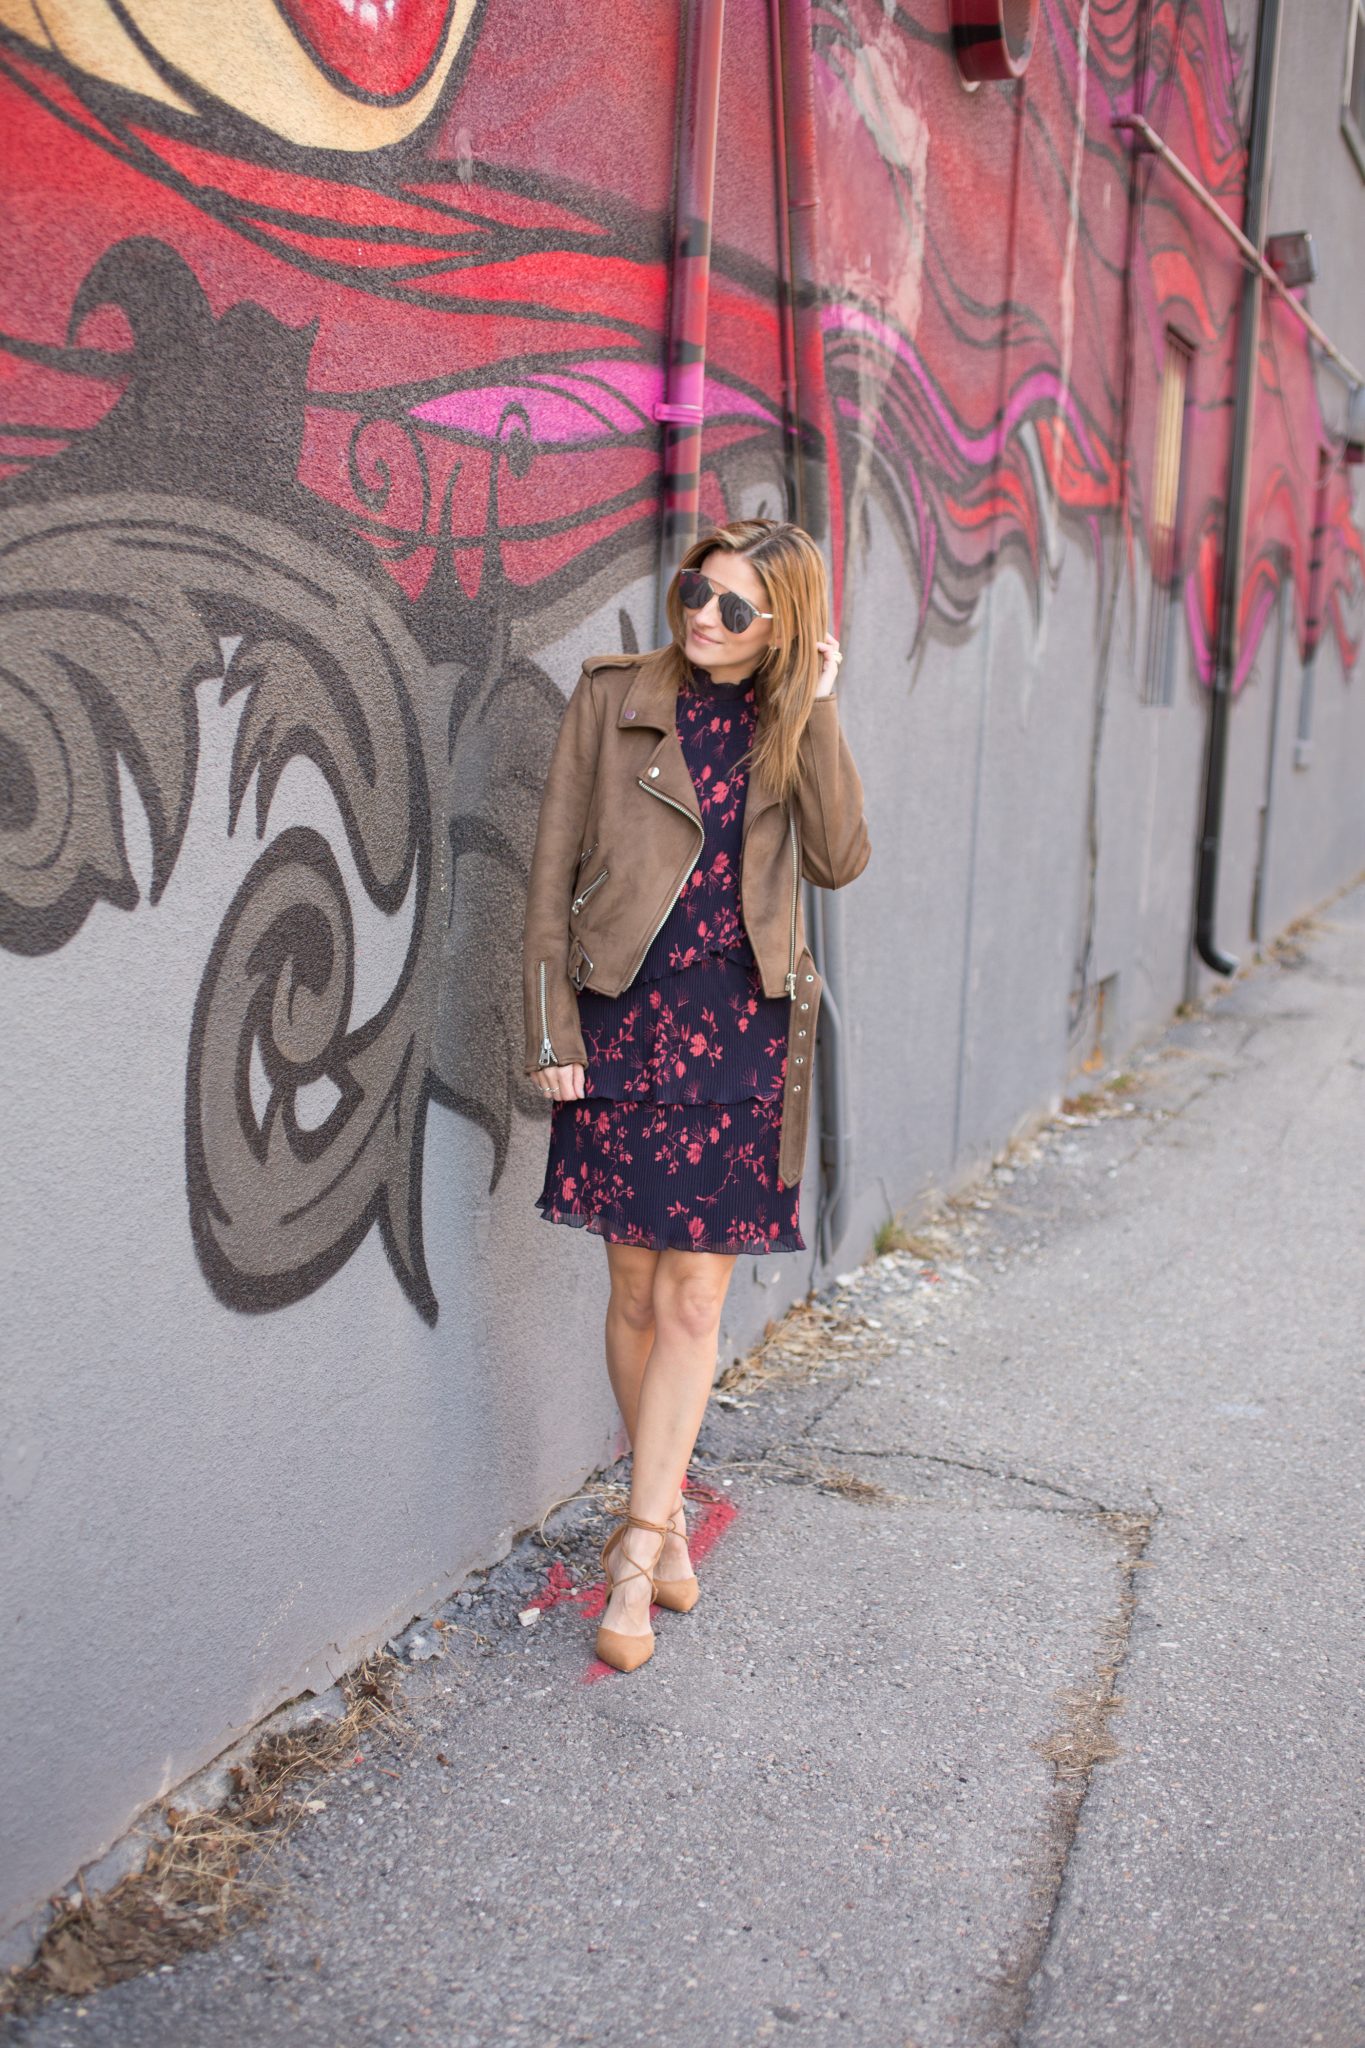 Marciano Cherry Blossom Dress, Le Chateau nude lace up heels, Zara suede moto jacket, Dior So Real Sunglasses